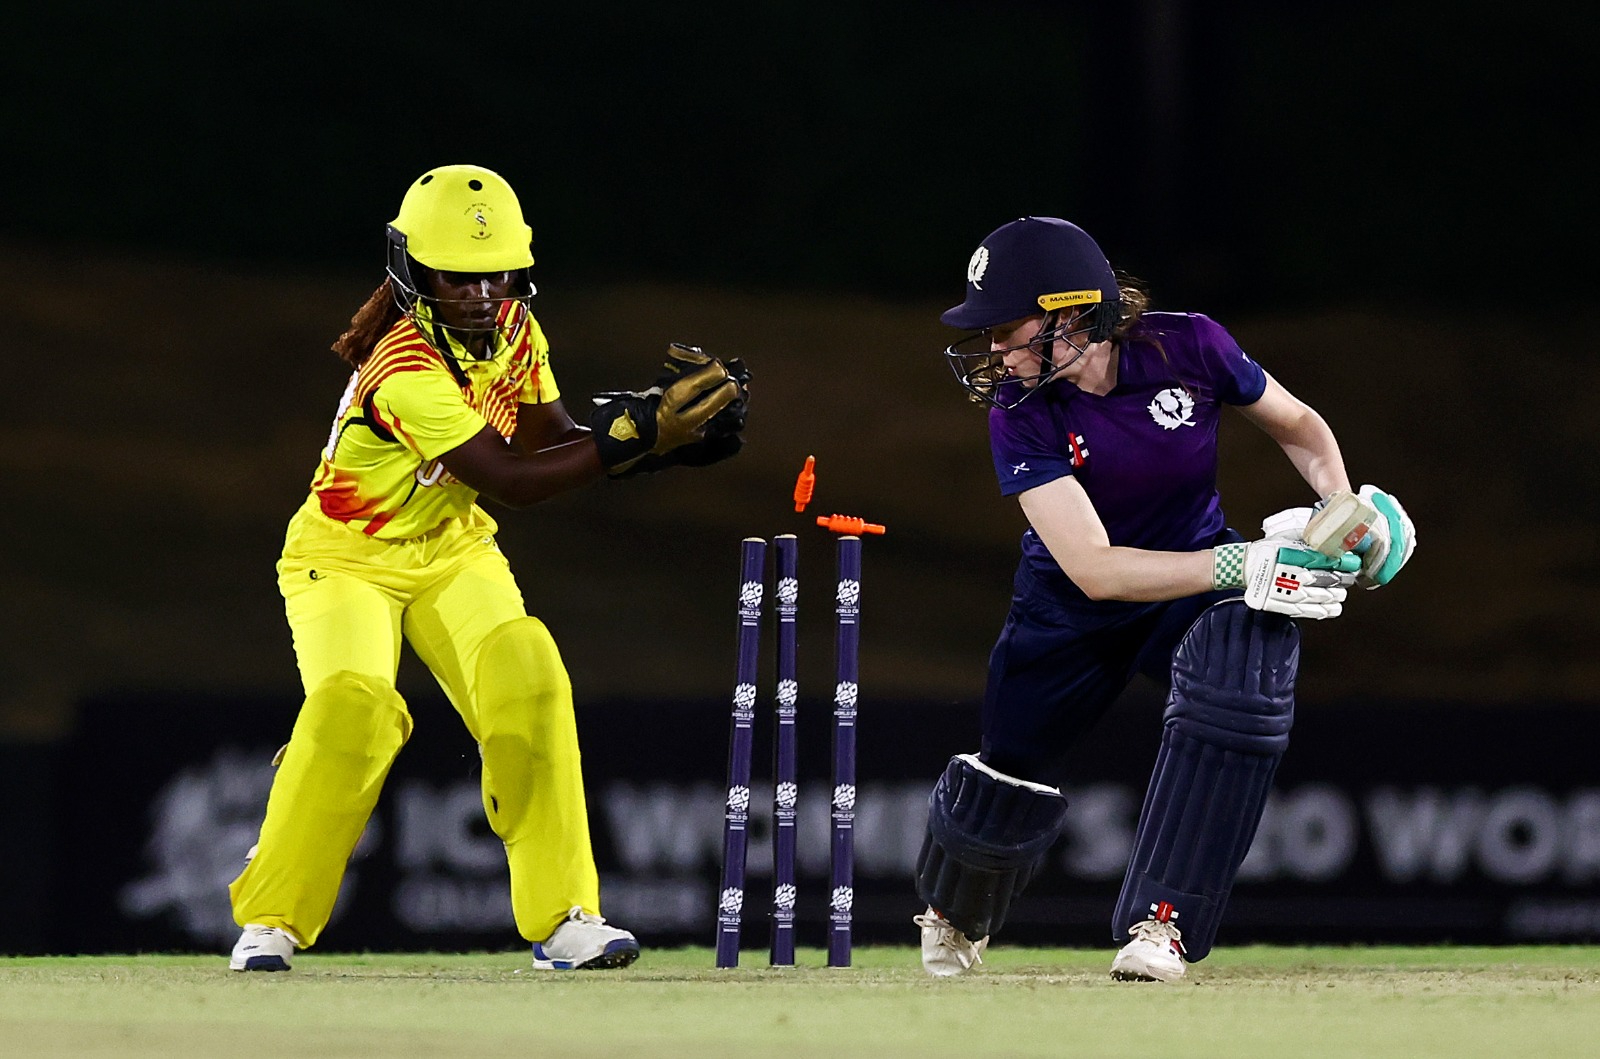 Victoria Pearls fall to Scotland in Women’s T20 World Cup Global Qualifiers opener